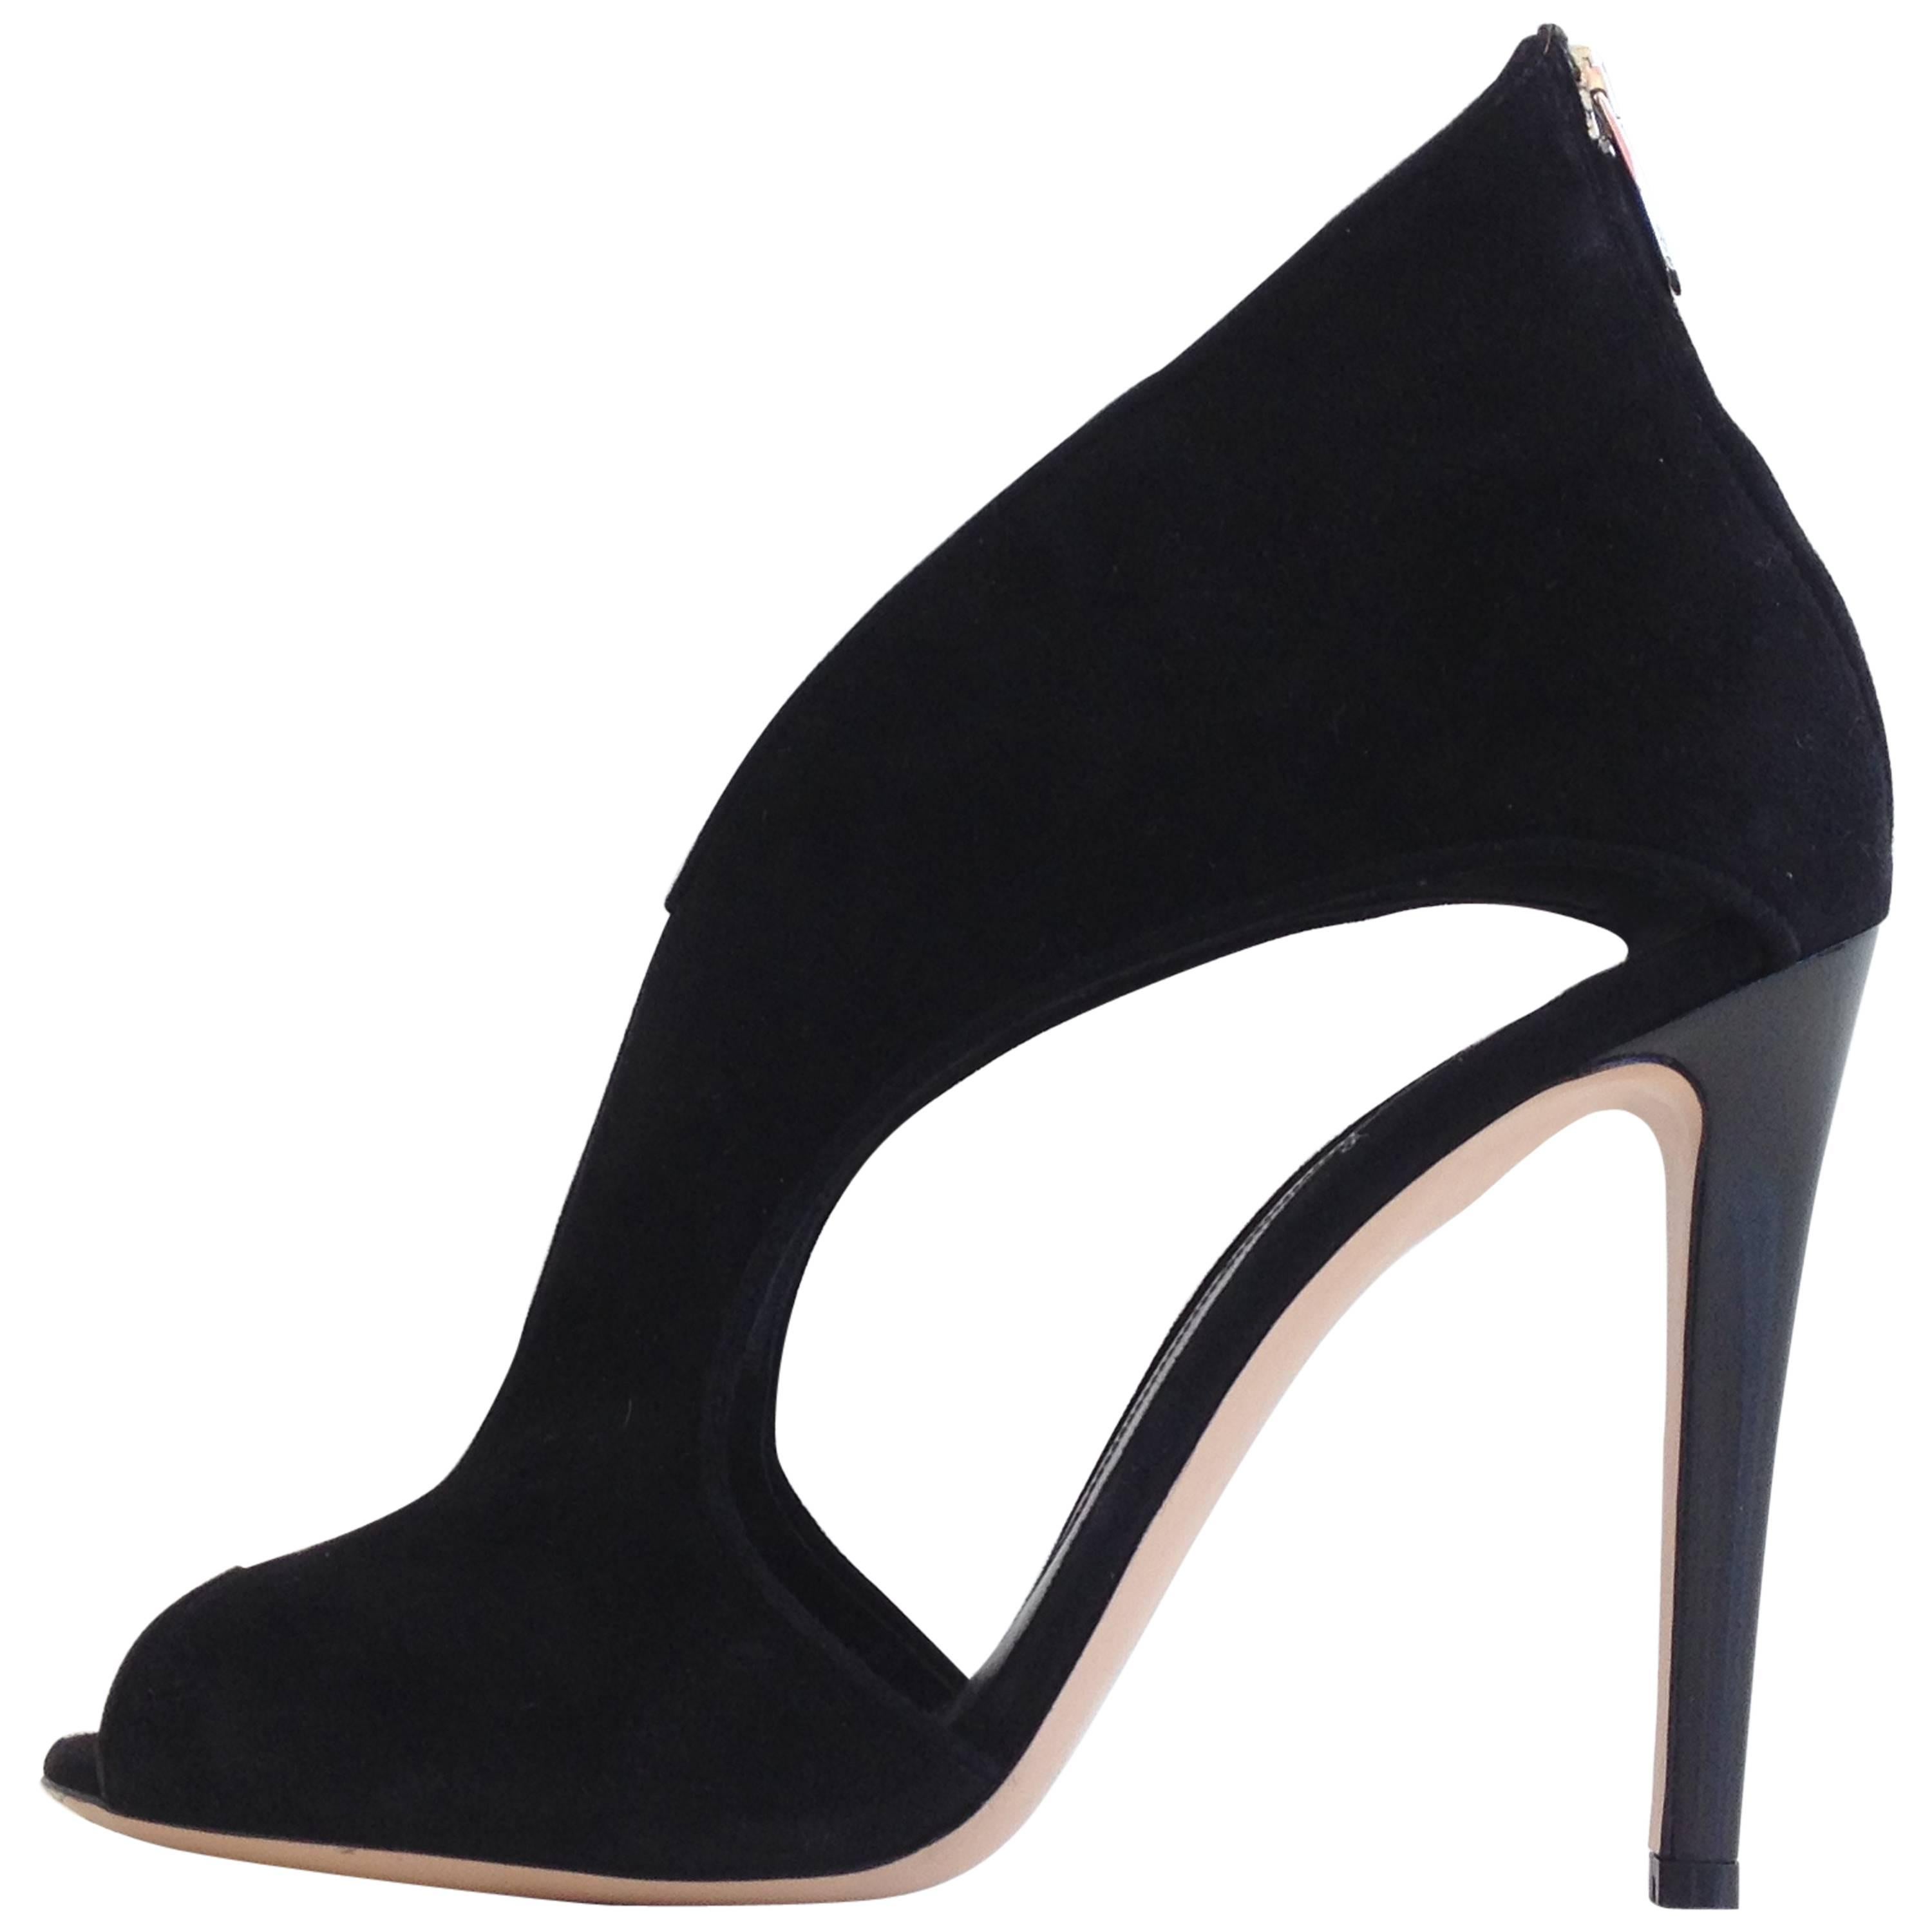 Gianvito Rossi Black Suede Cutout Heels Size 39 (8.5) For Sale